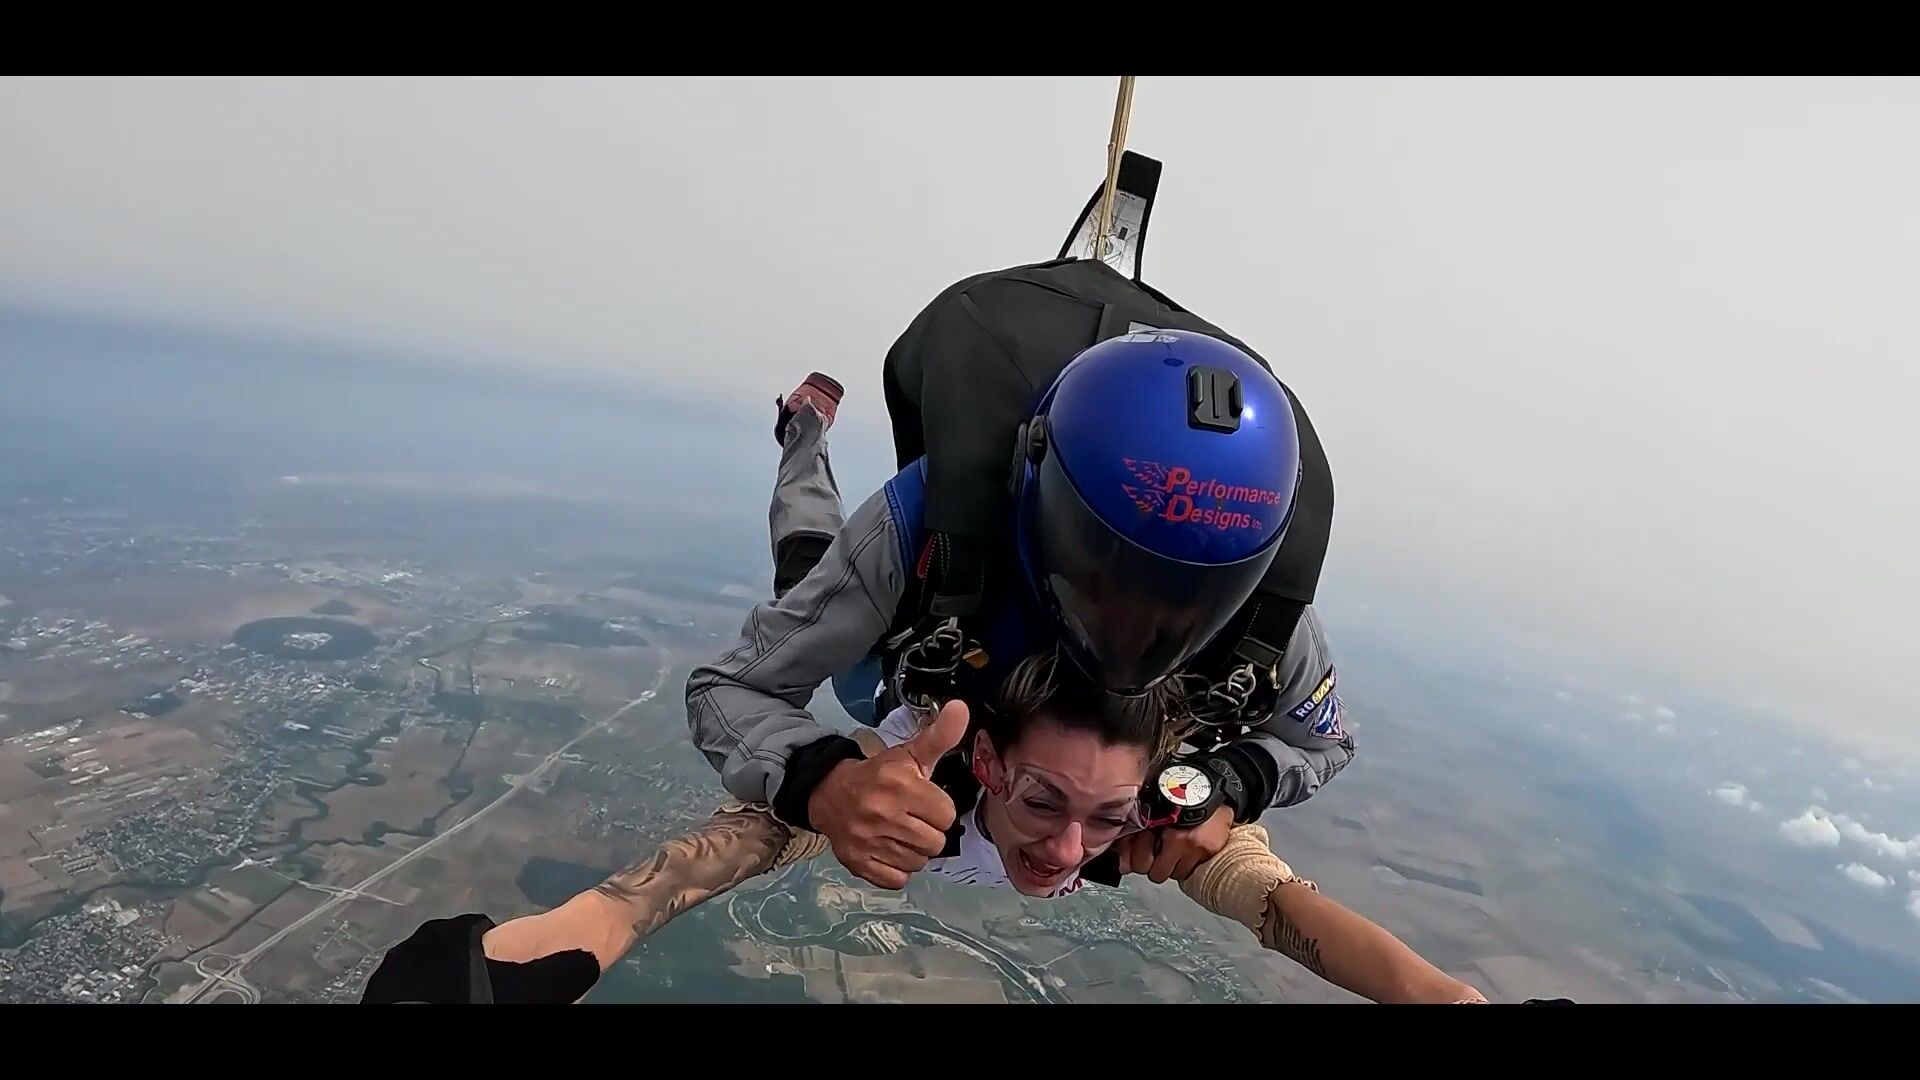 Jumping from a plane ;)